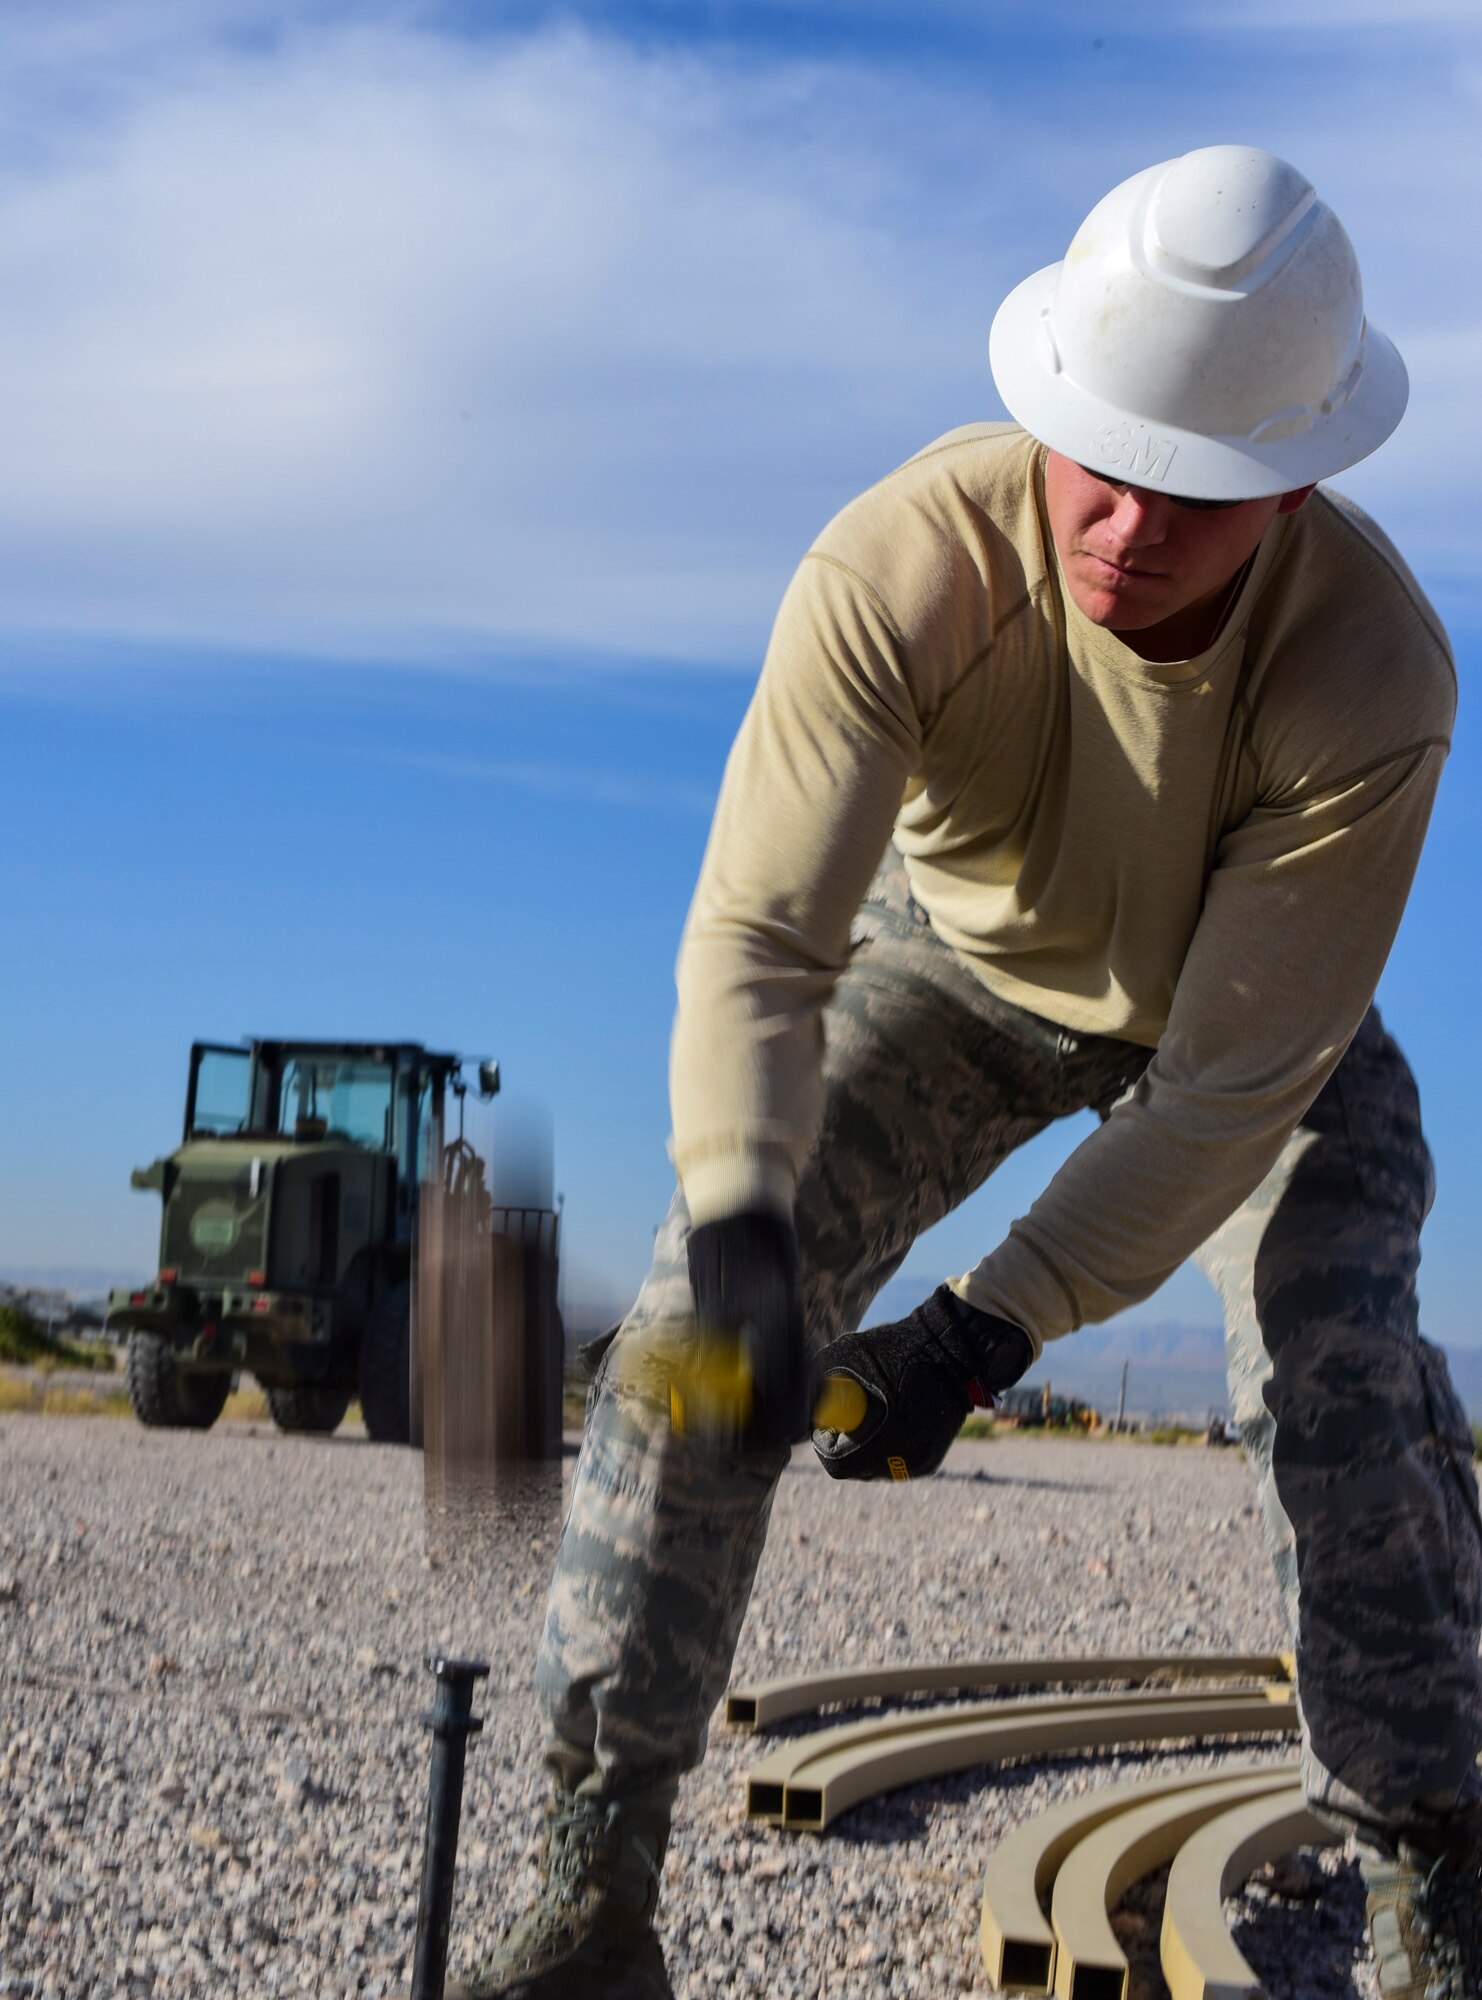 Airman 1st Class Kolbey Adams, 99th Civil Engineer Squadron structural engineer, uses a sledgehammer to drive a stake into the ground during a base emergency engineer force training exercise at Nellis Air Force Base, Nevada, Oct. 19, 2017. More than a dozen Airmen worked together to build shelters during the training exercise. (U.S. Air Force photo by Airman 1st Class Andrew D. Sarver/Released)